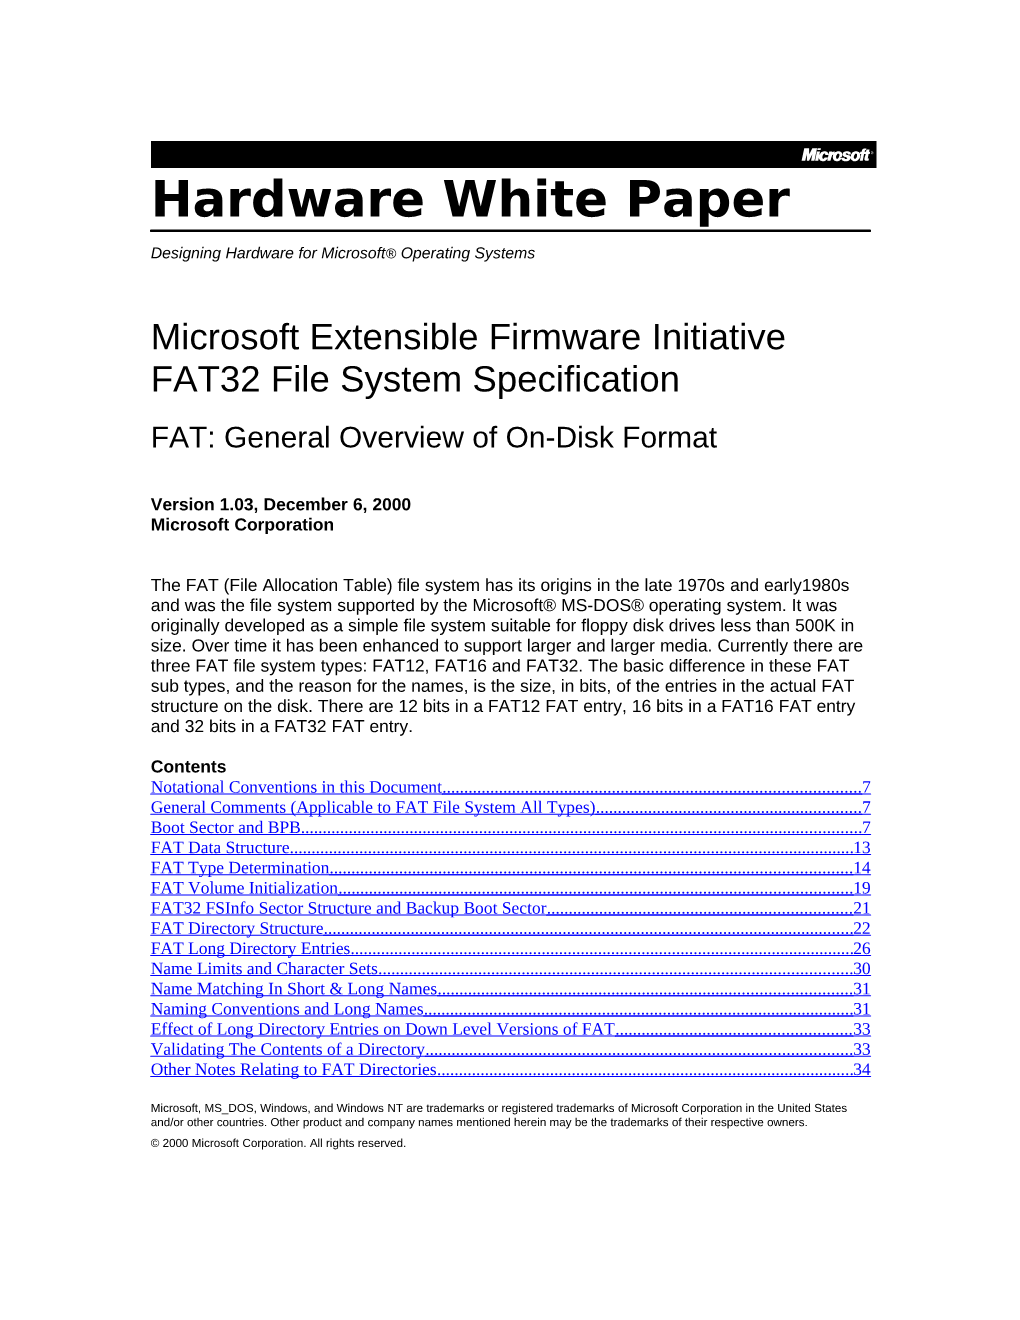 Microsoft Extensible Firmware Initiative FAT32 File System Specification FAT: General Overview of On-Disk Format